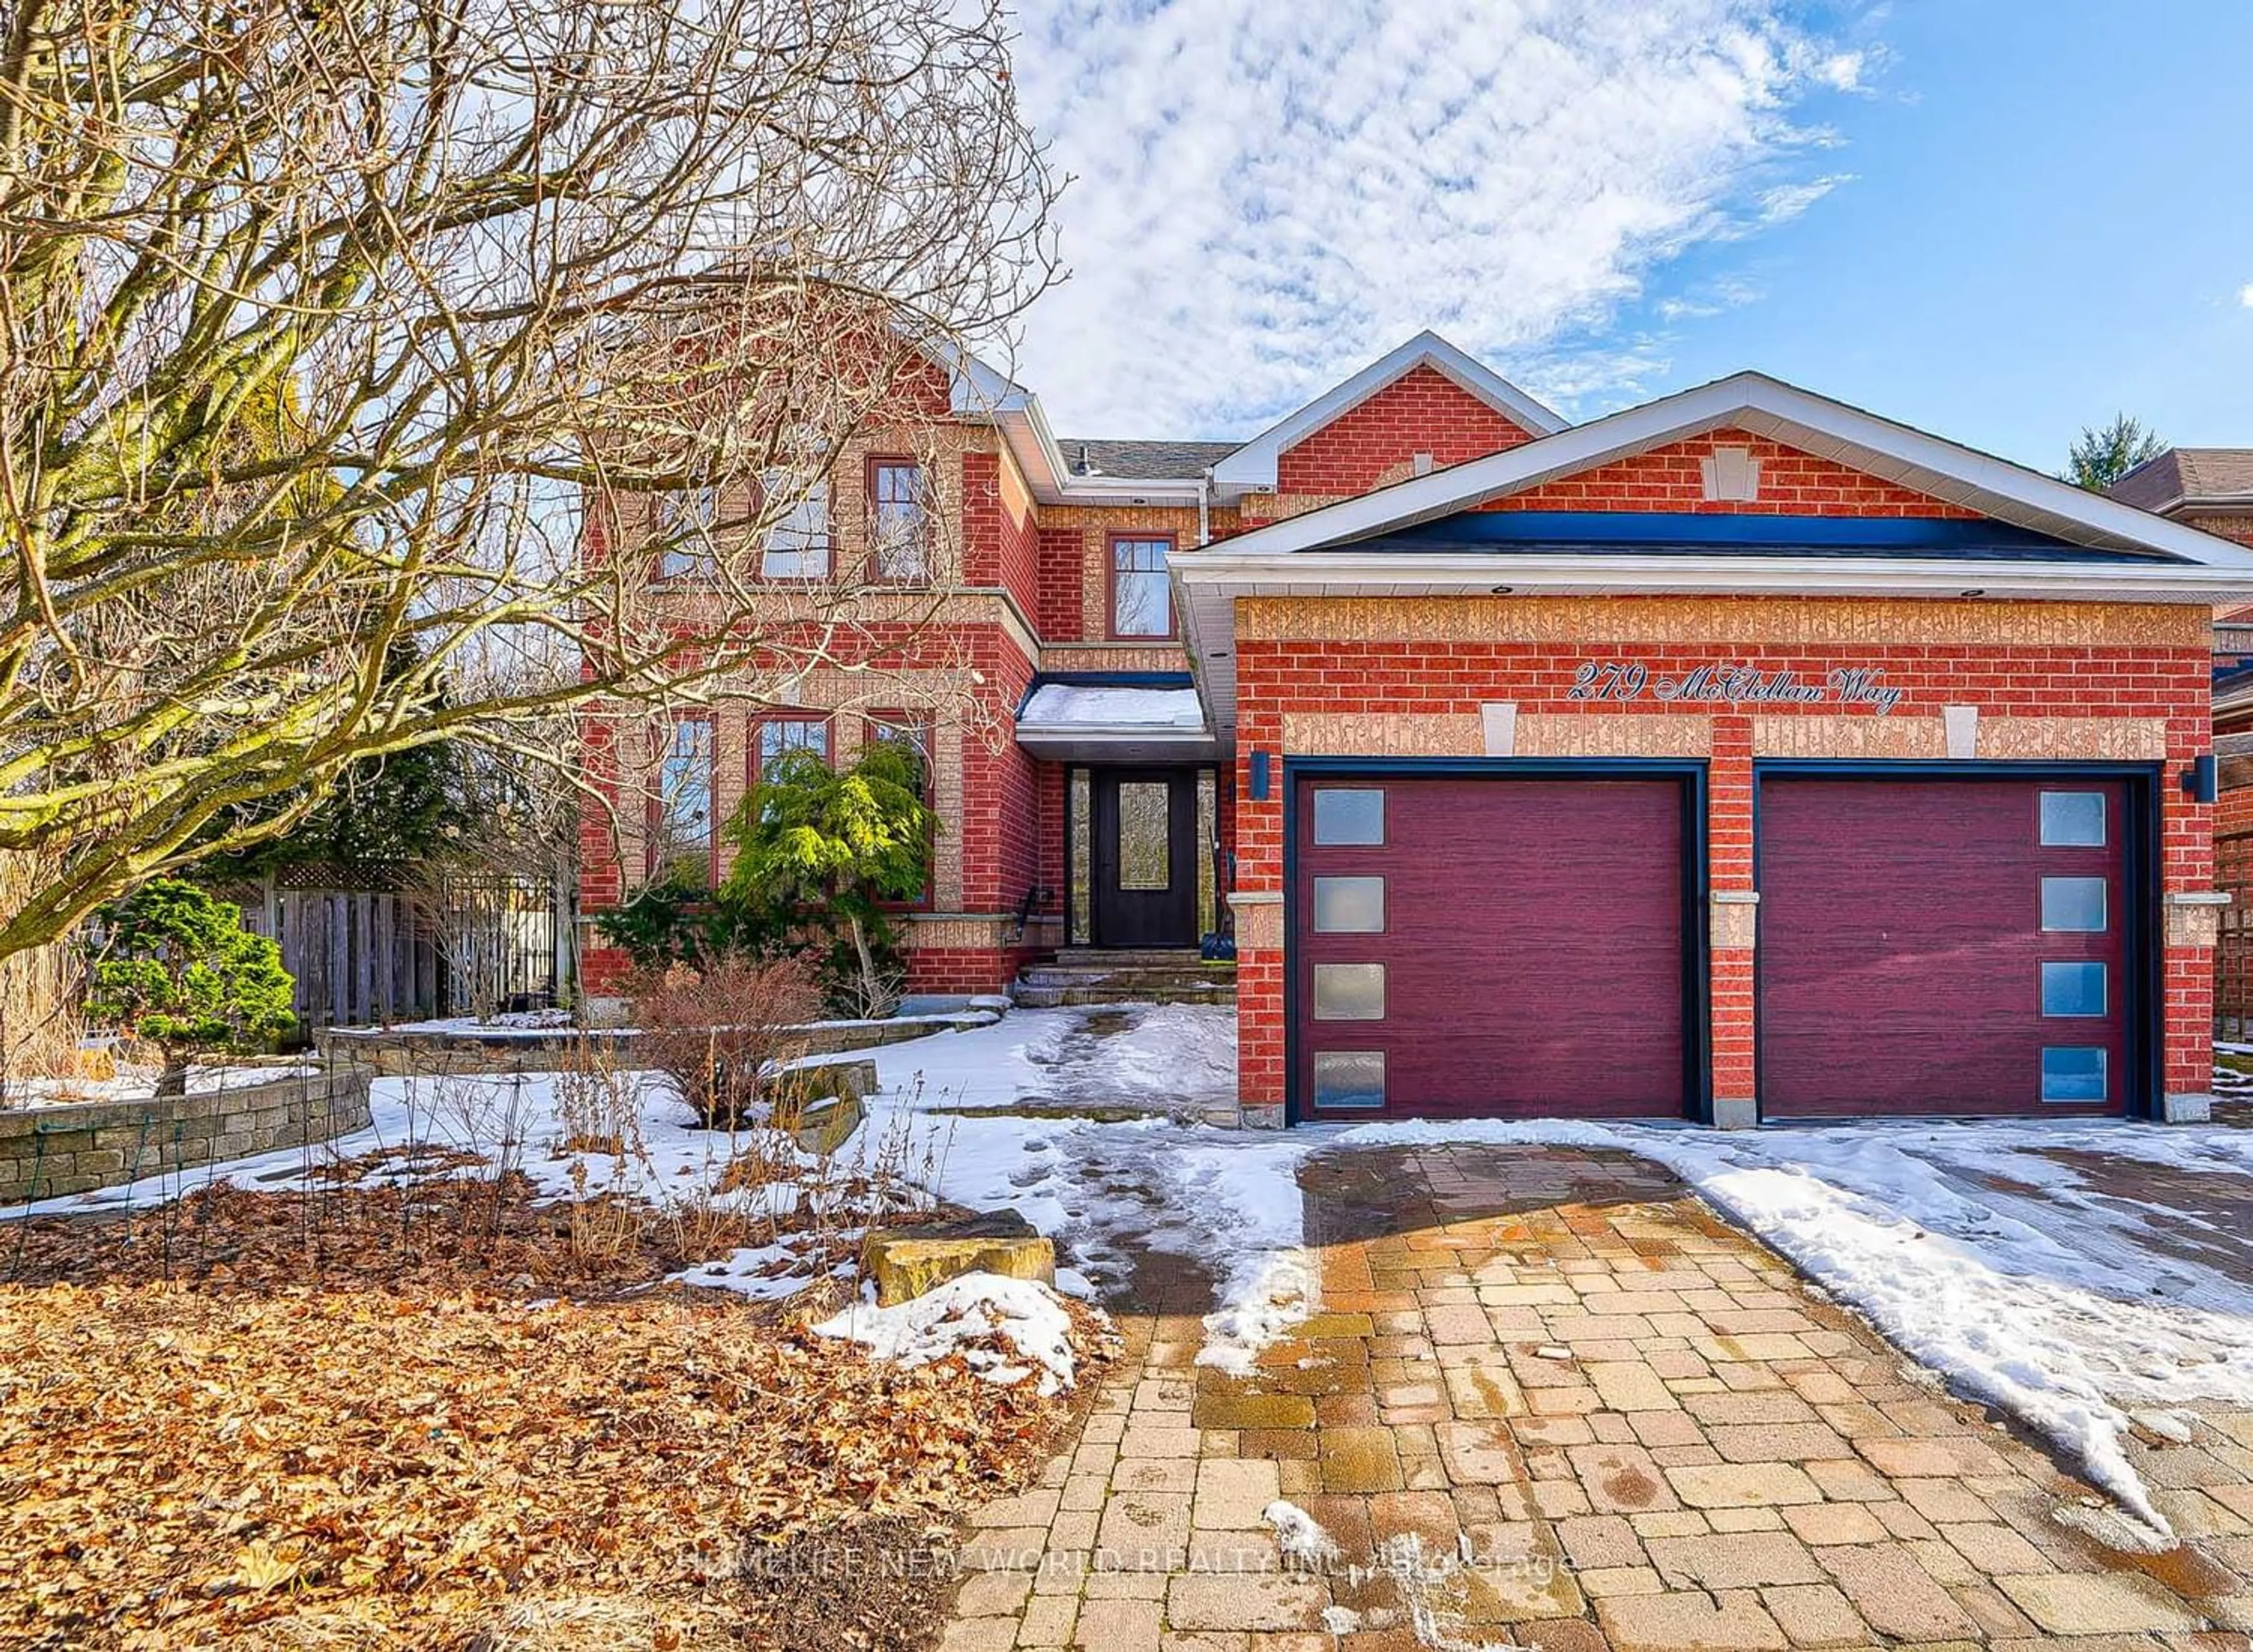 Home with brick exterior material for 279 Mcclelland Way, Aurora Ontario L4G 6P2